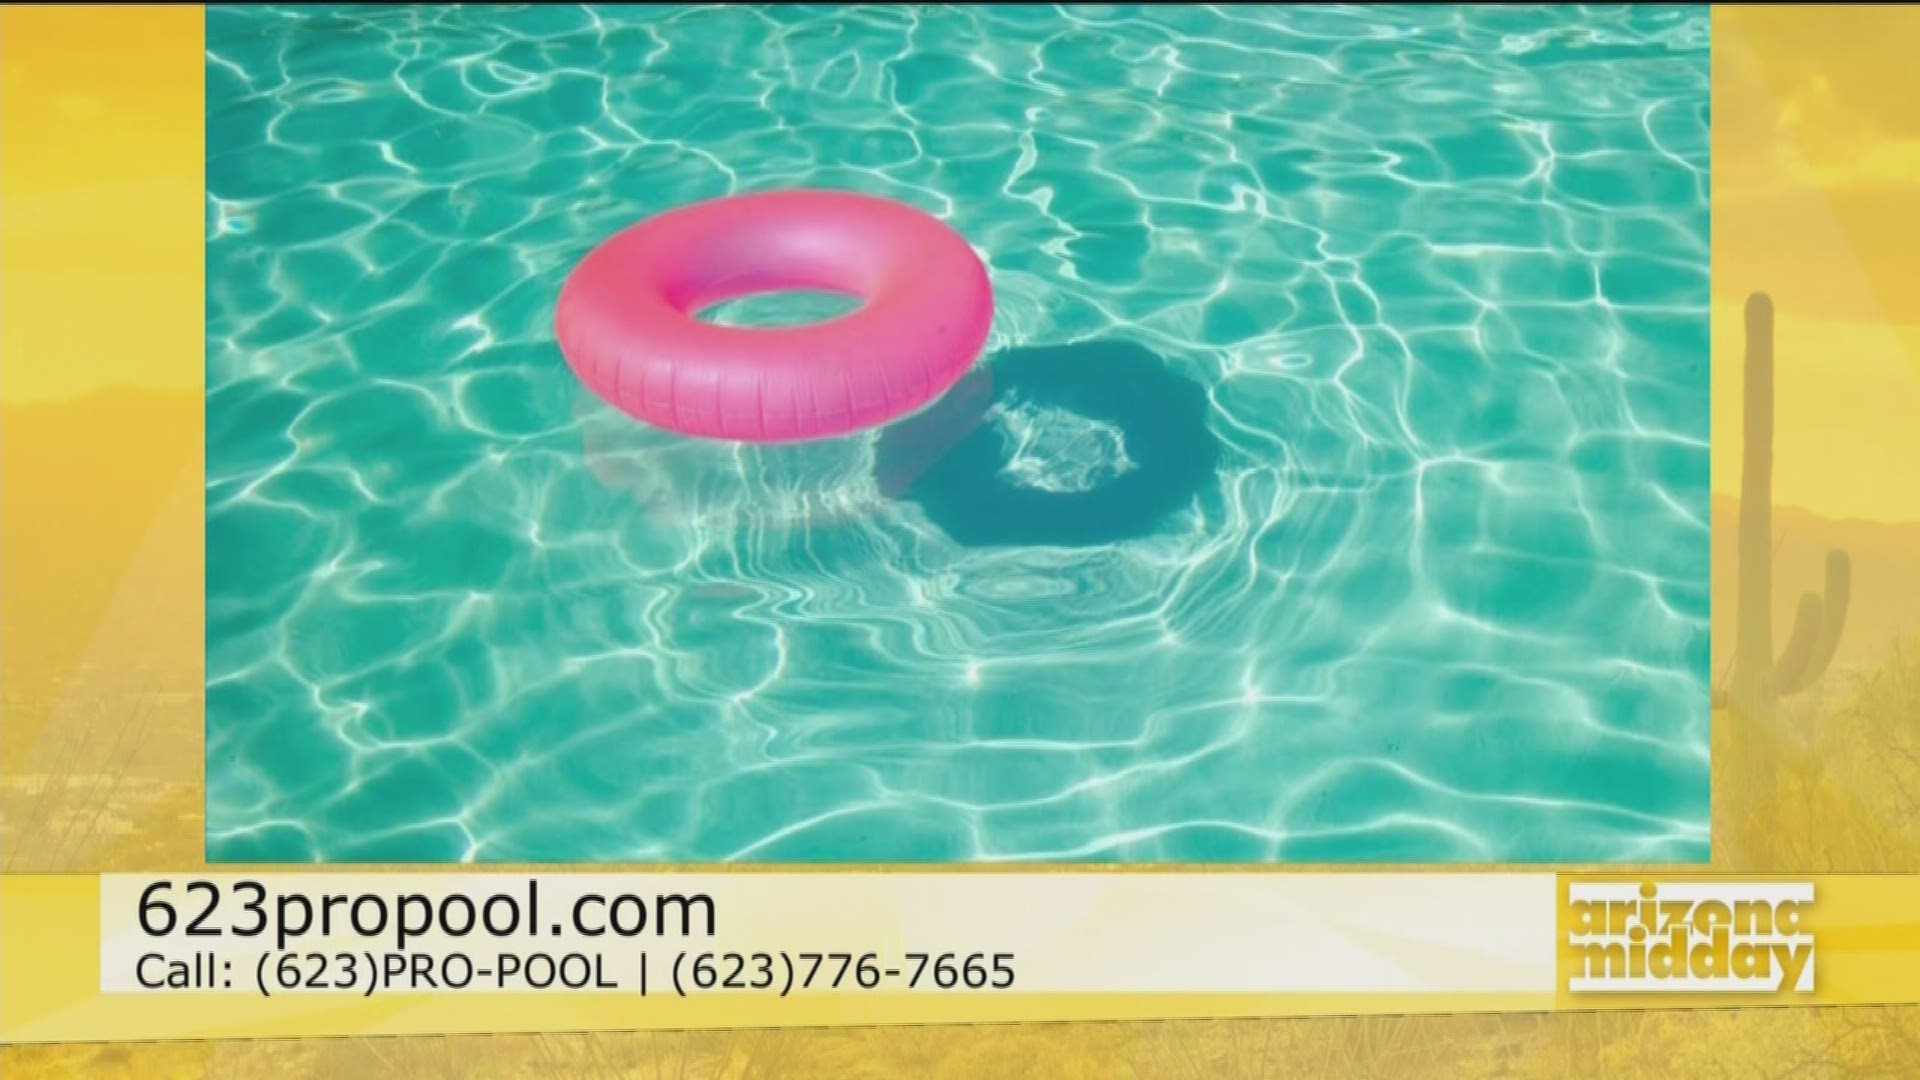 James Cole, owner of The Pool Professionals, is showing us how to keep your pool looking great all summer long